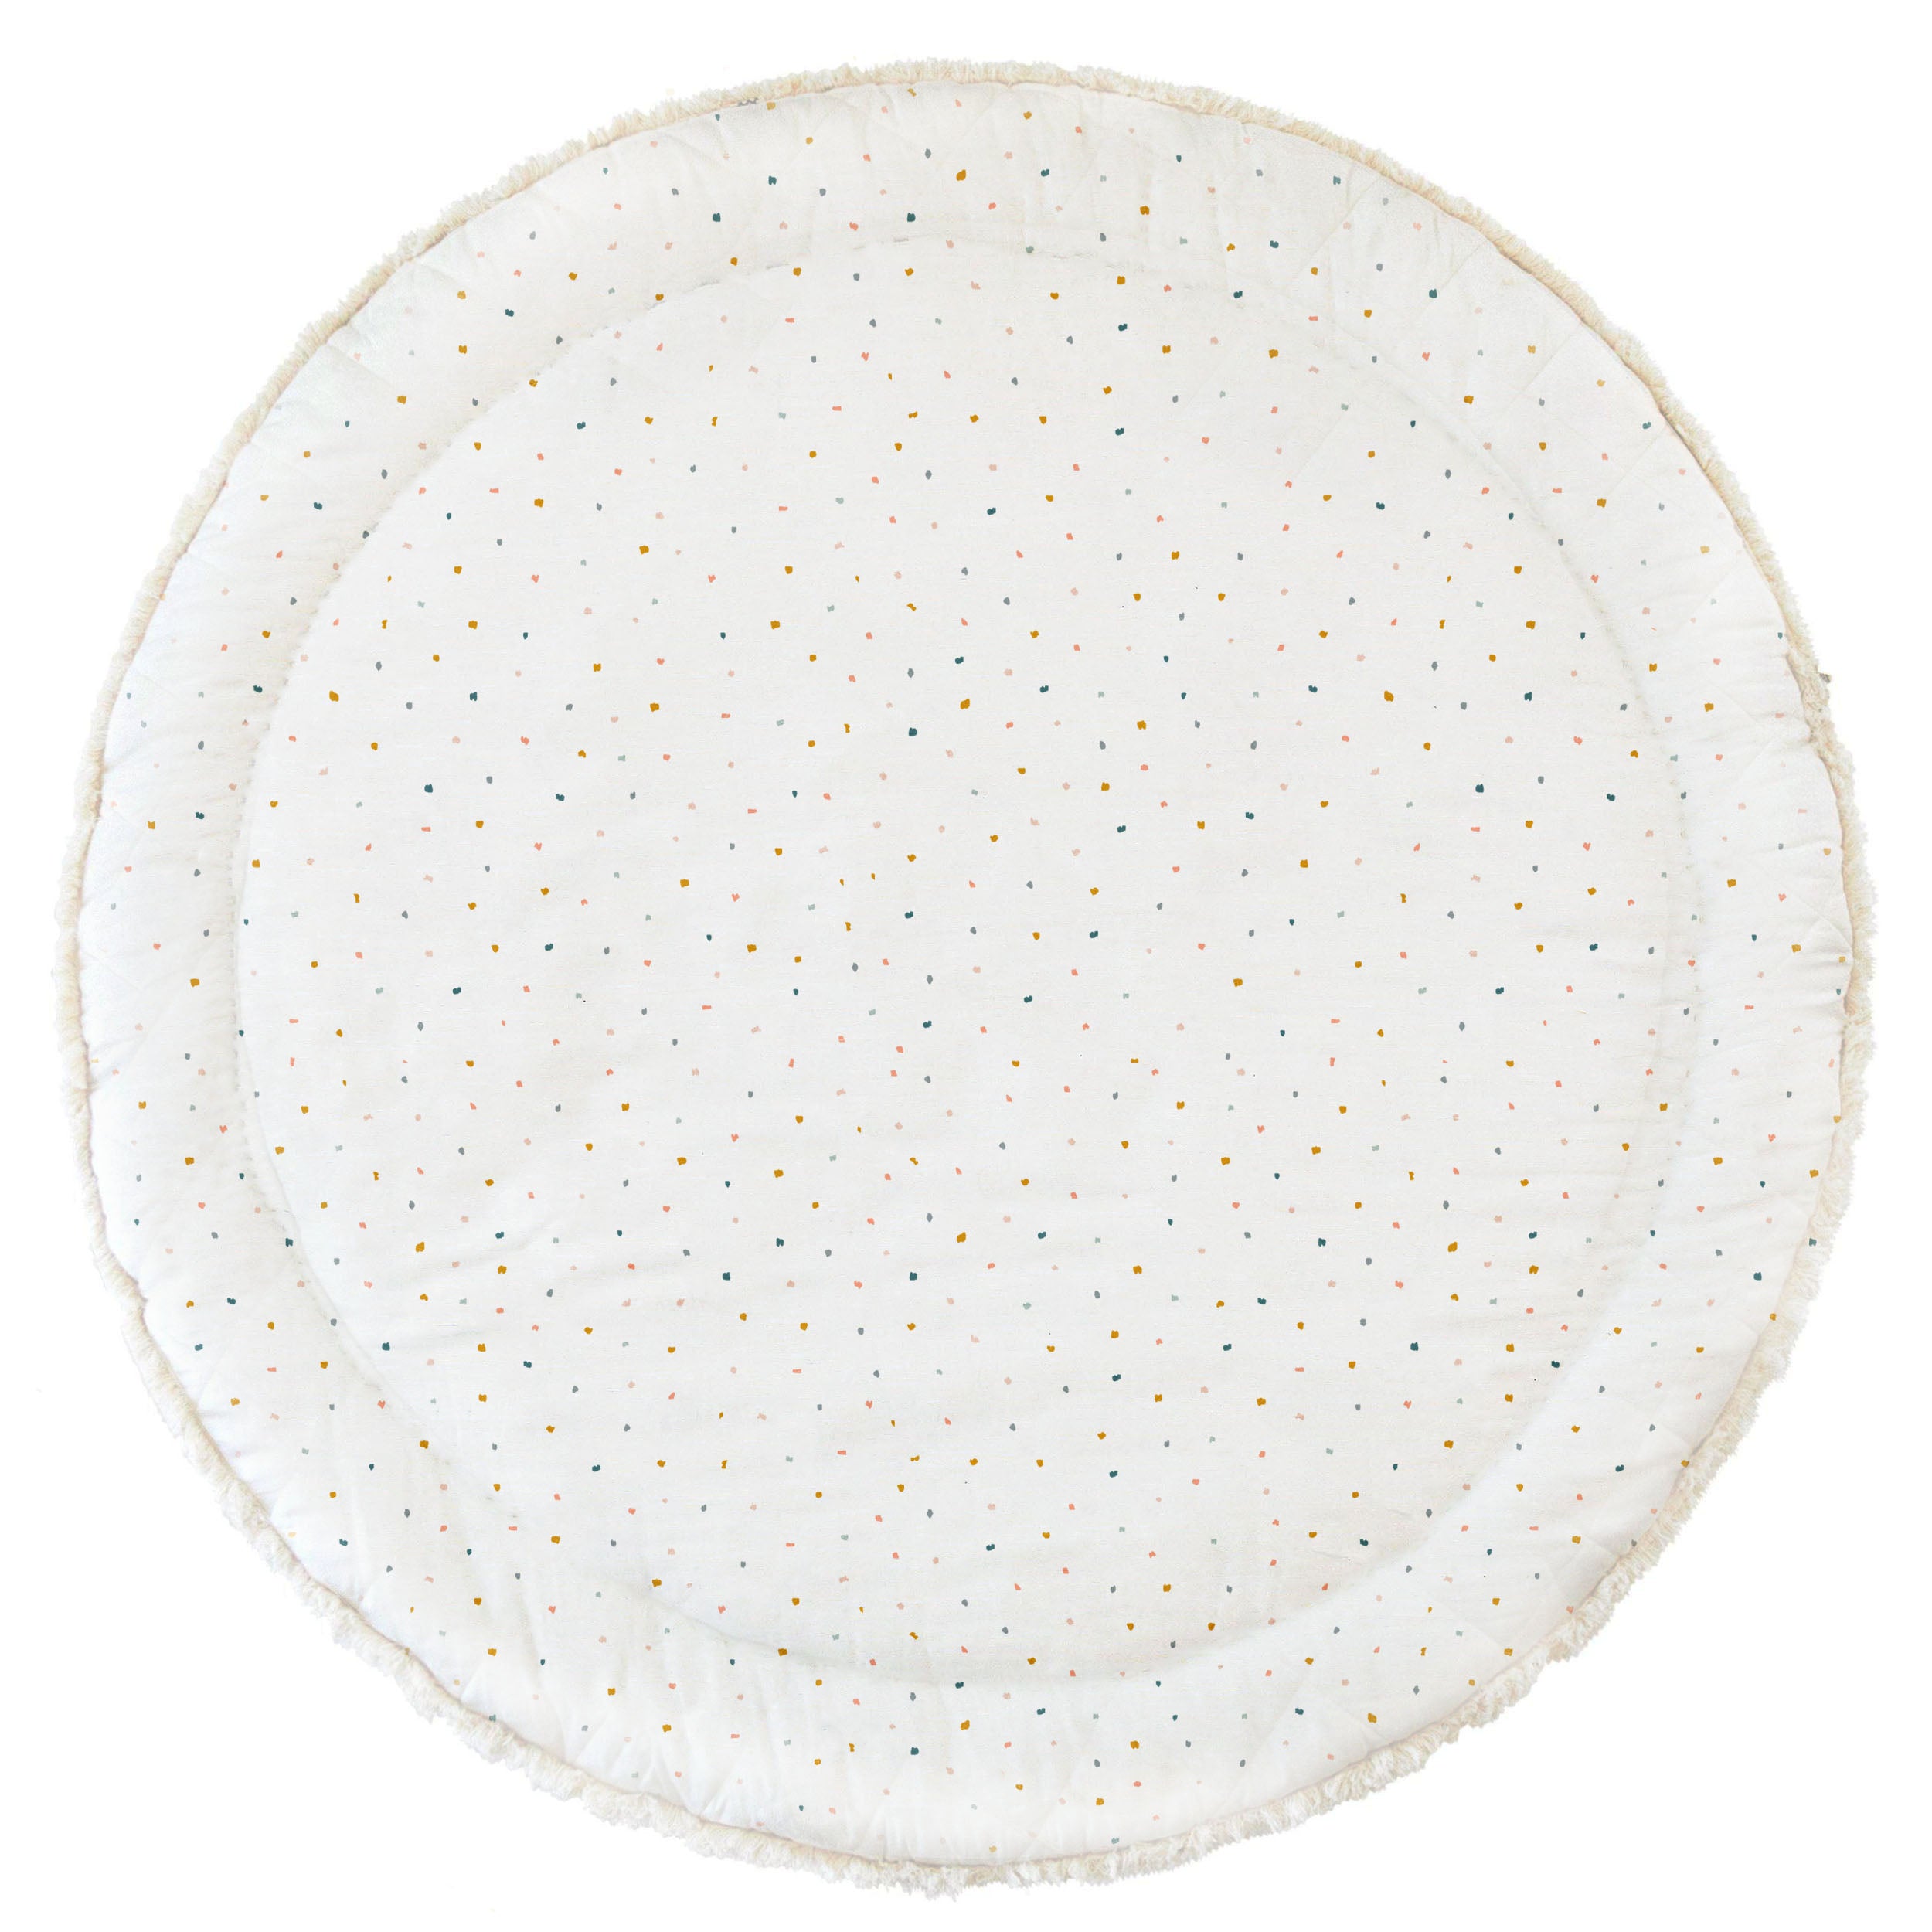 A round Organic Cotton Quilted Reversible Play Mat in Dotty and Ivory by Makemake Organics decorated with small multicolored dots and a simple stitched border, photographed against a white background.